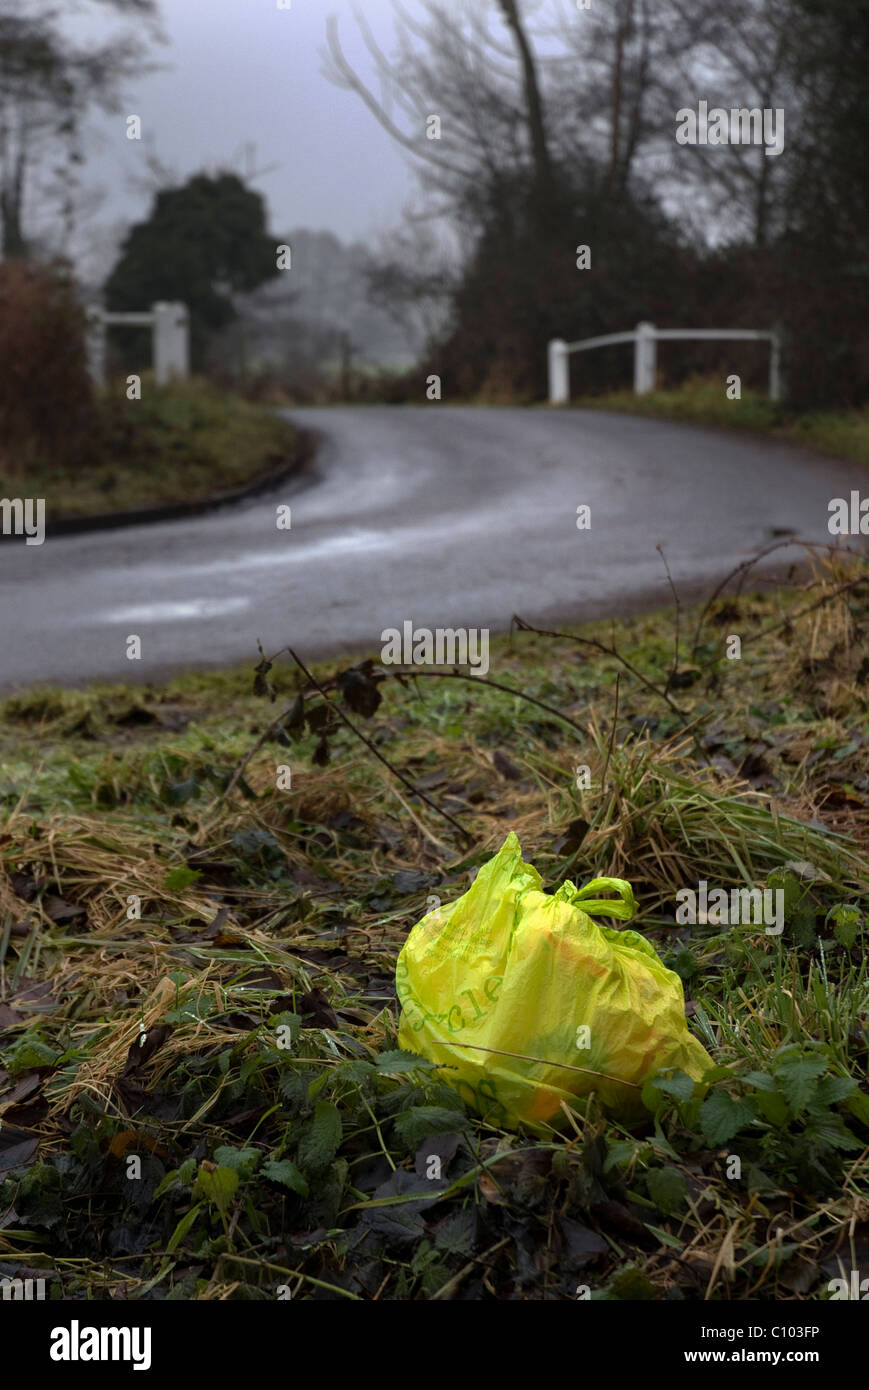 abandoned yellow plastic bag of rubbish on country grass verge Stock Photo